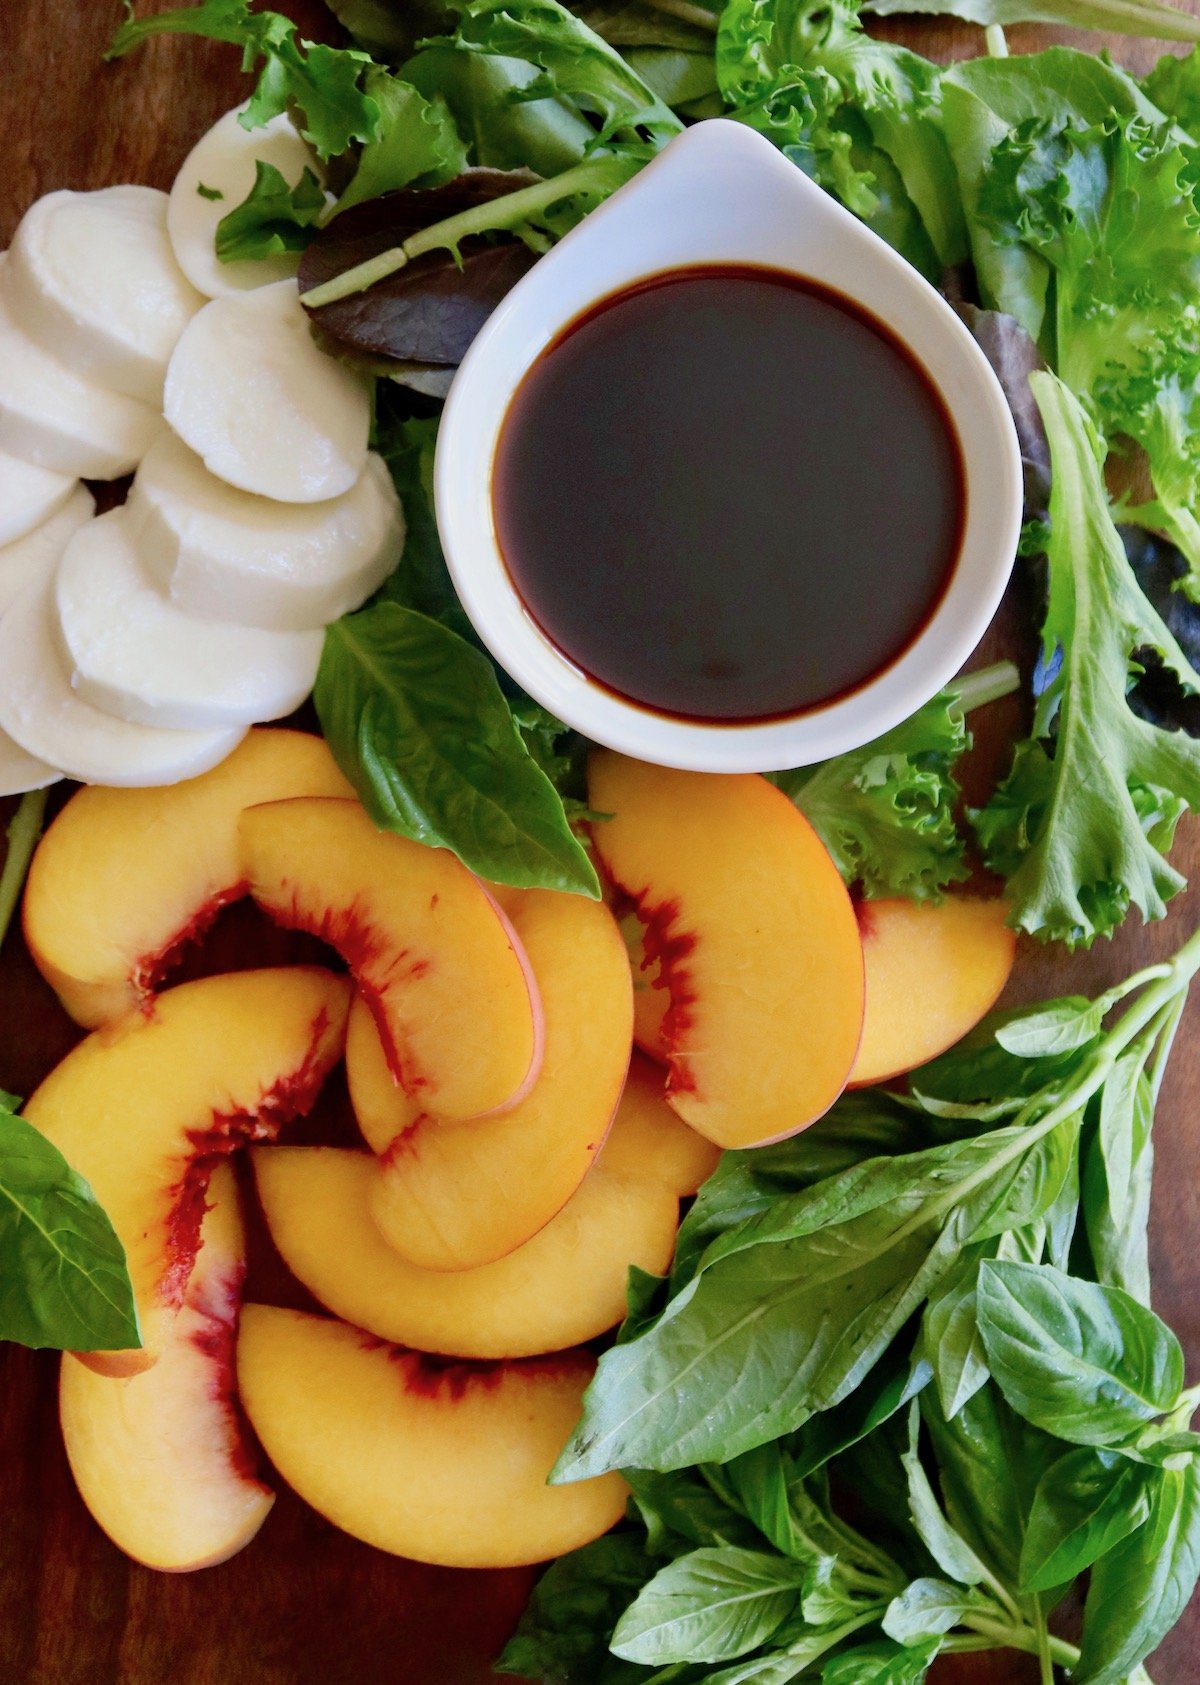 Sliced peaches, mozzarella, fresh basil leaves and lettuce, with a small white bowl of balsamic vinegar, all on a dark wood cutting board.